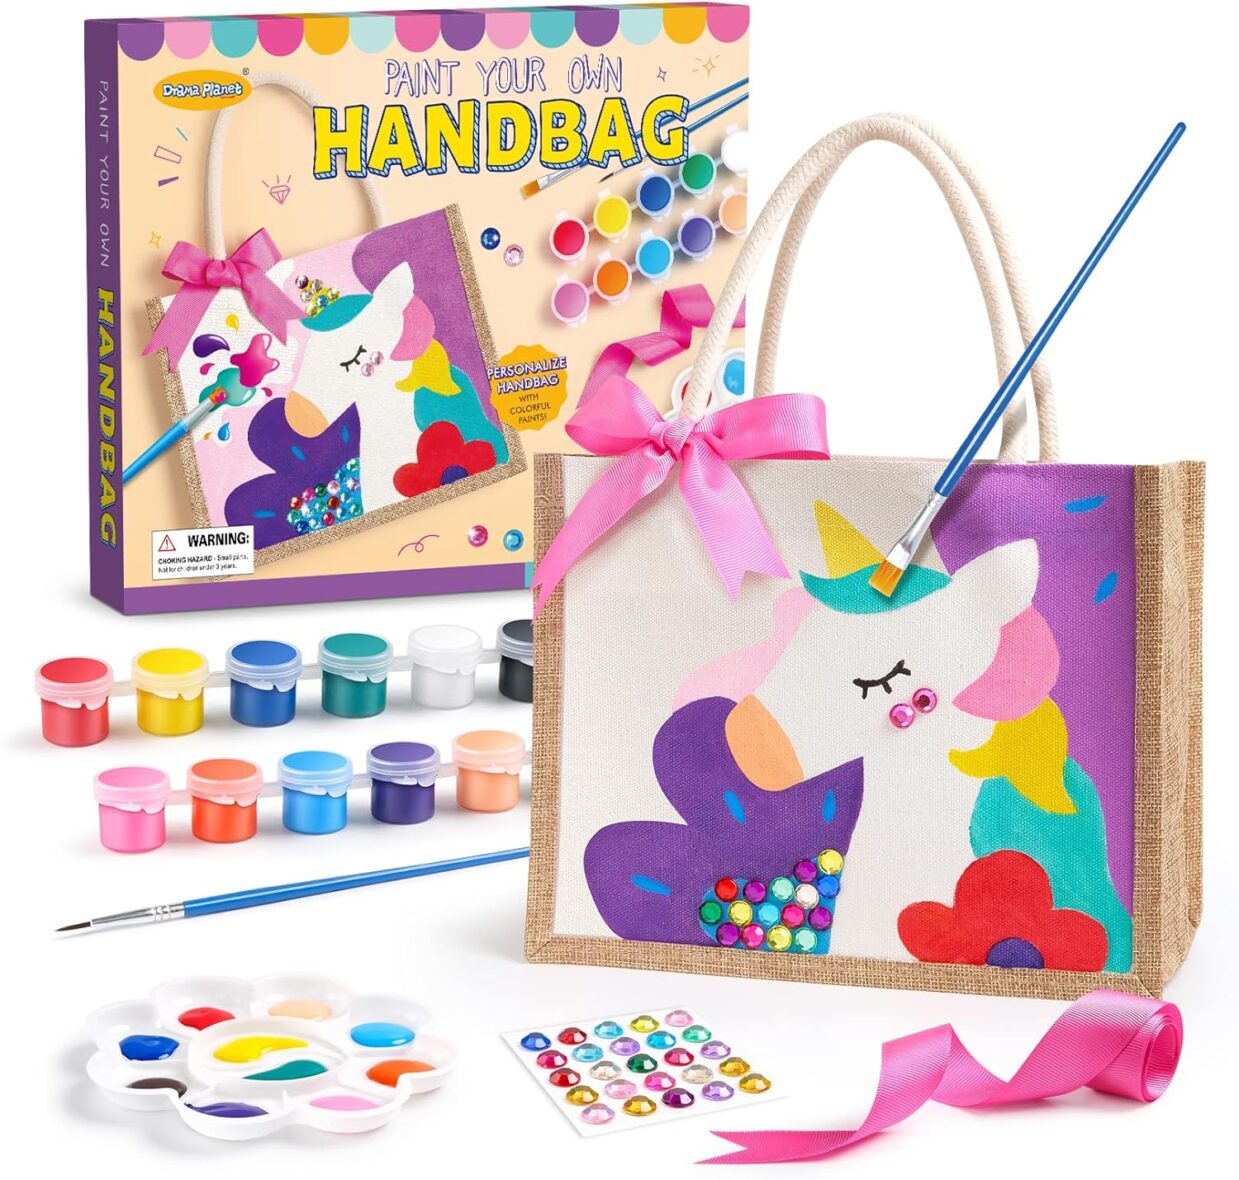 Drama Planet Painting Kit, Paint Your Own Handbag, Arts and Crafts for Girls, Art Activities & DIY Personalized Handbag